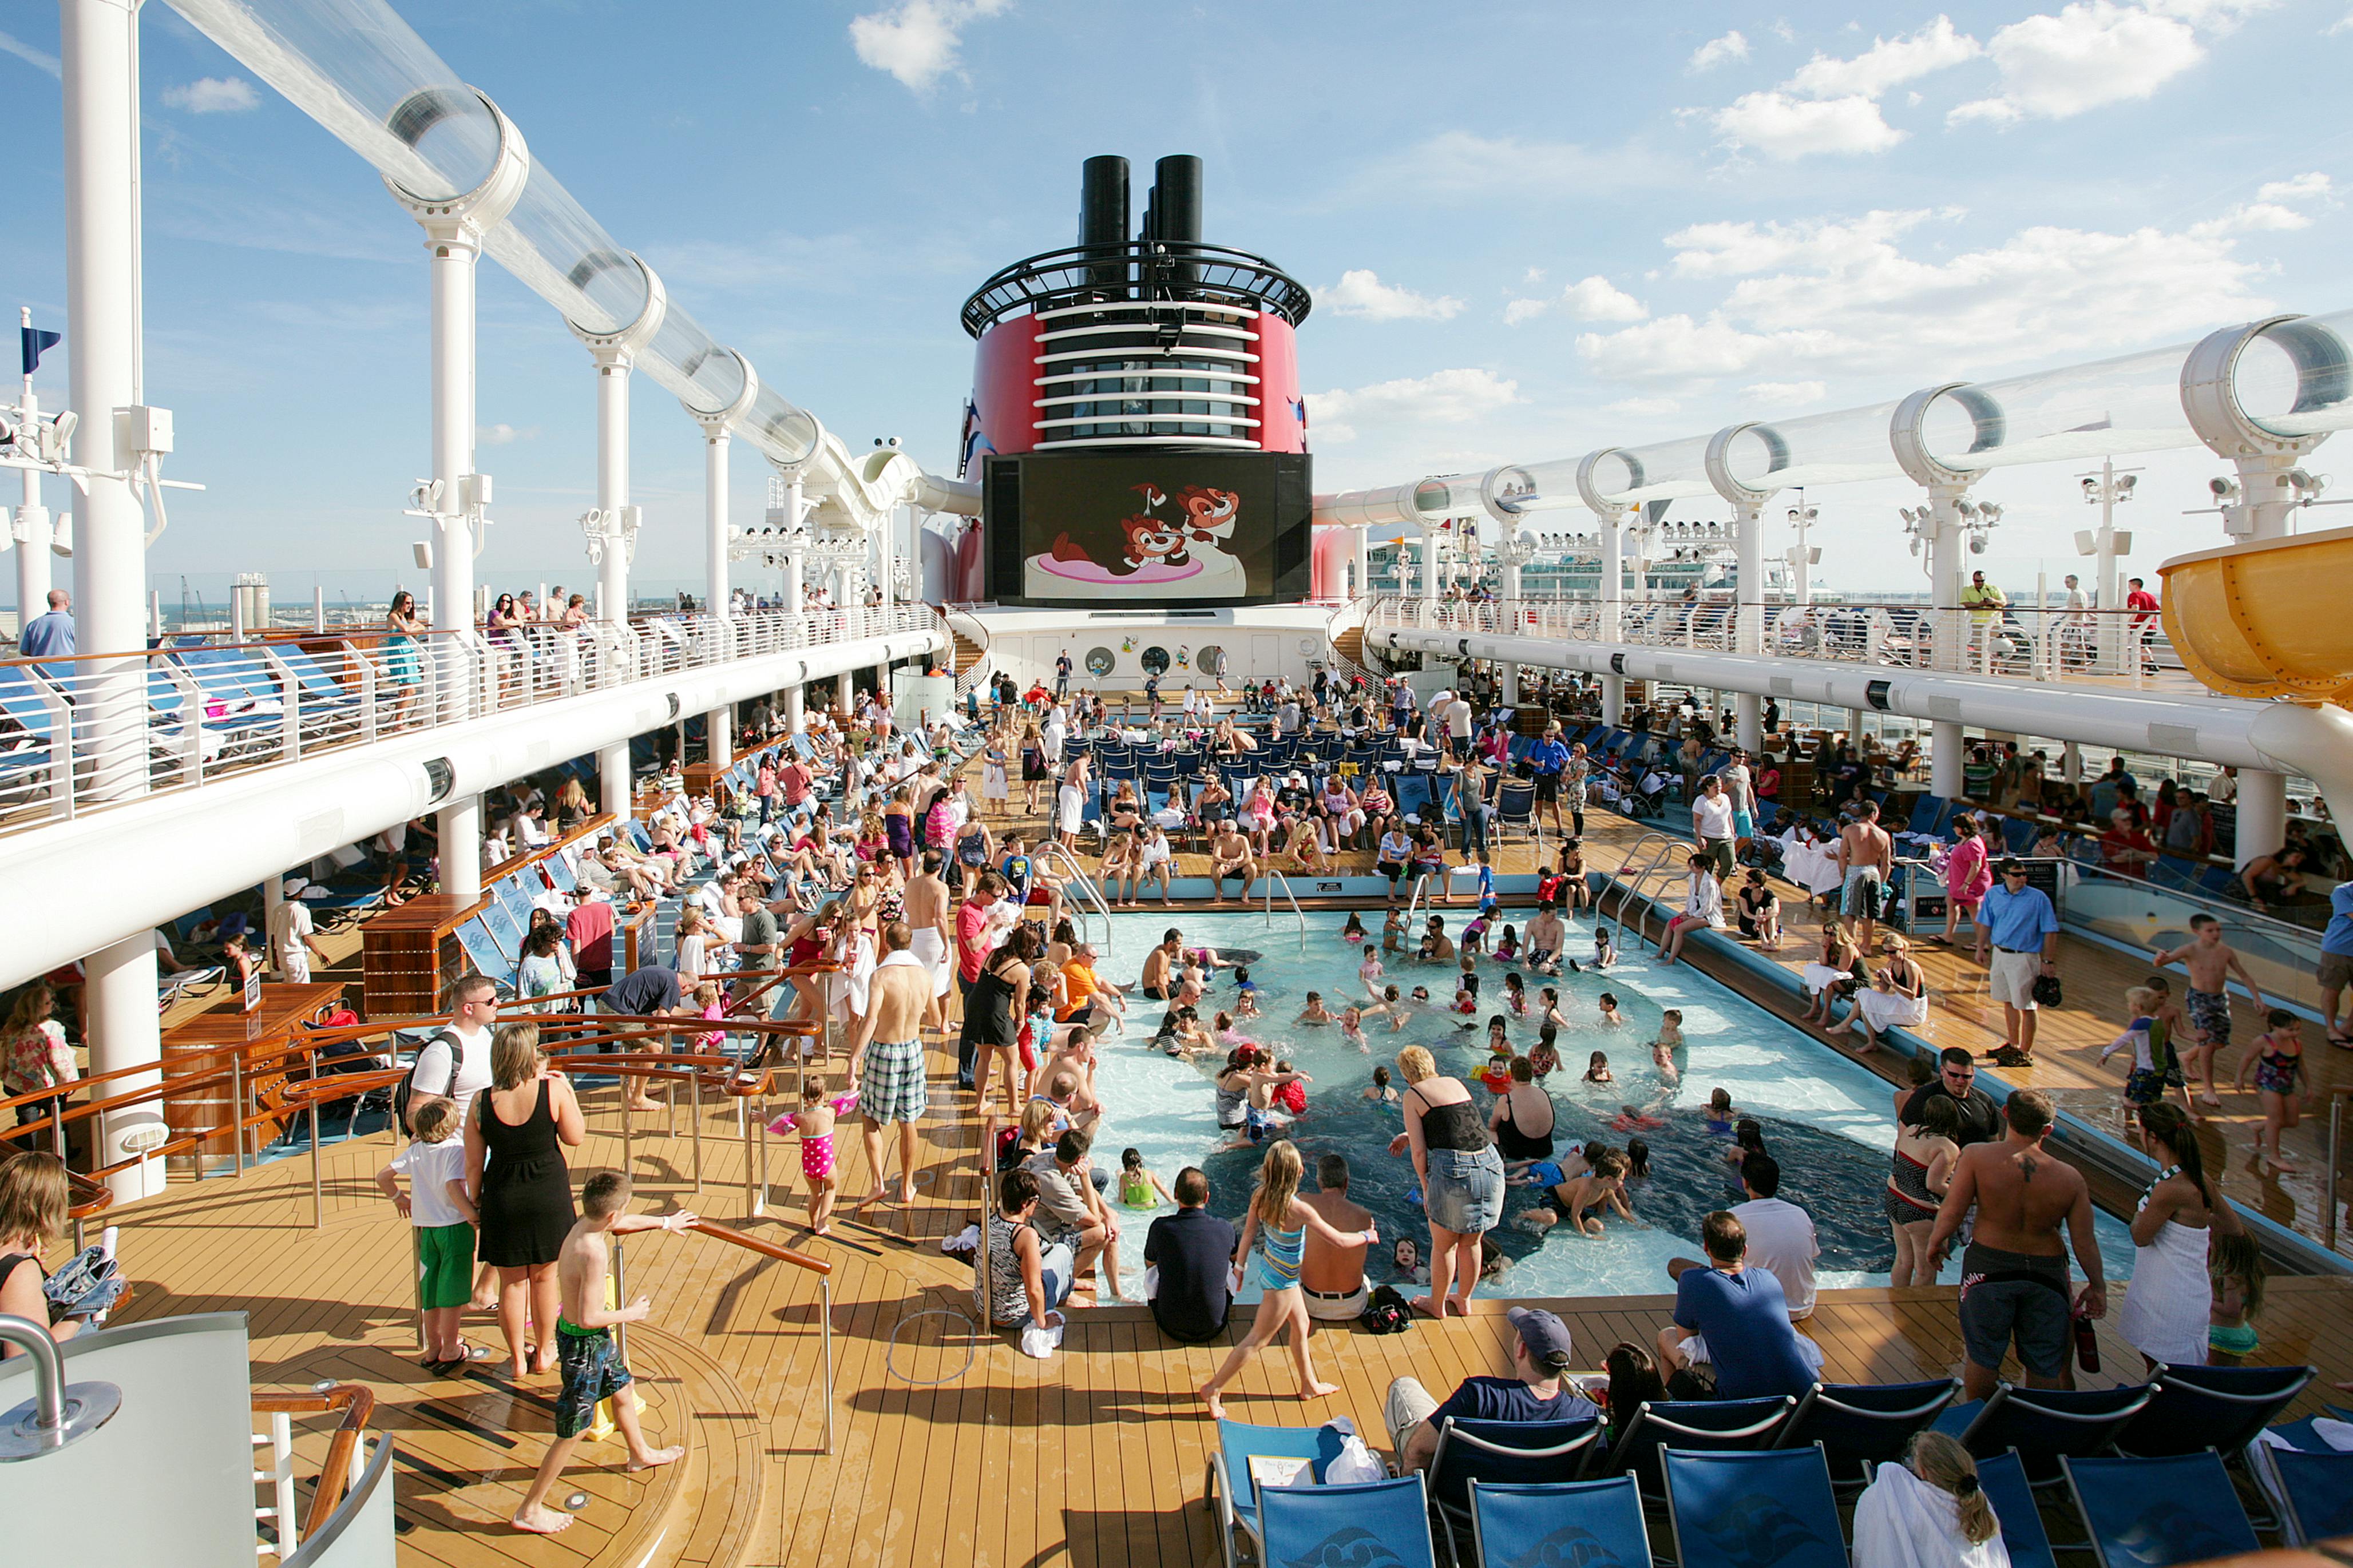 Disney Cruise Deals for Disney Plus Subscribers The Krazy Coupon Lady